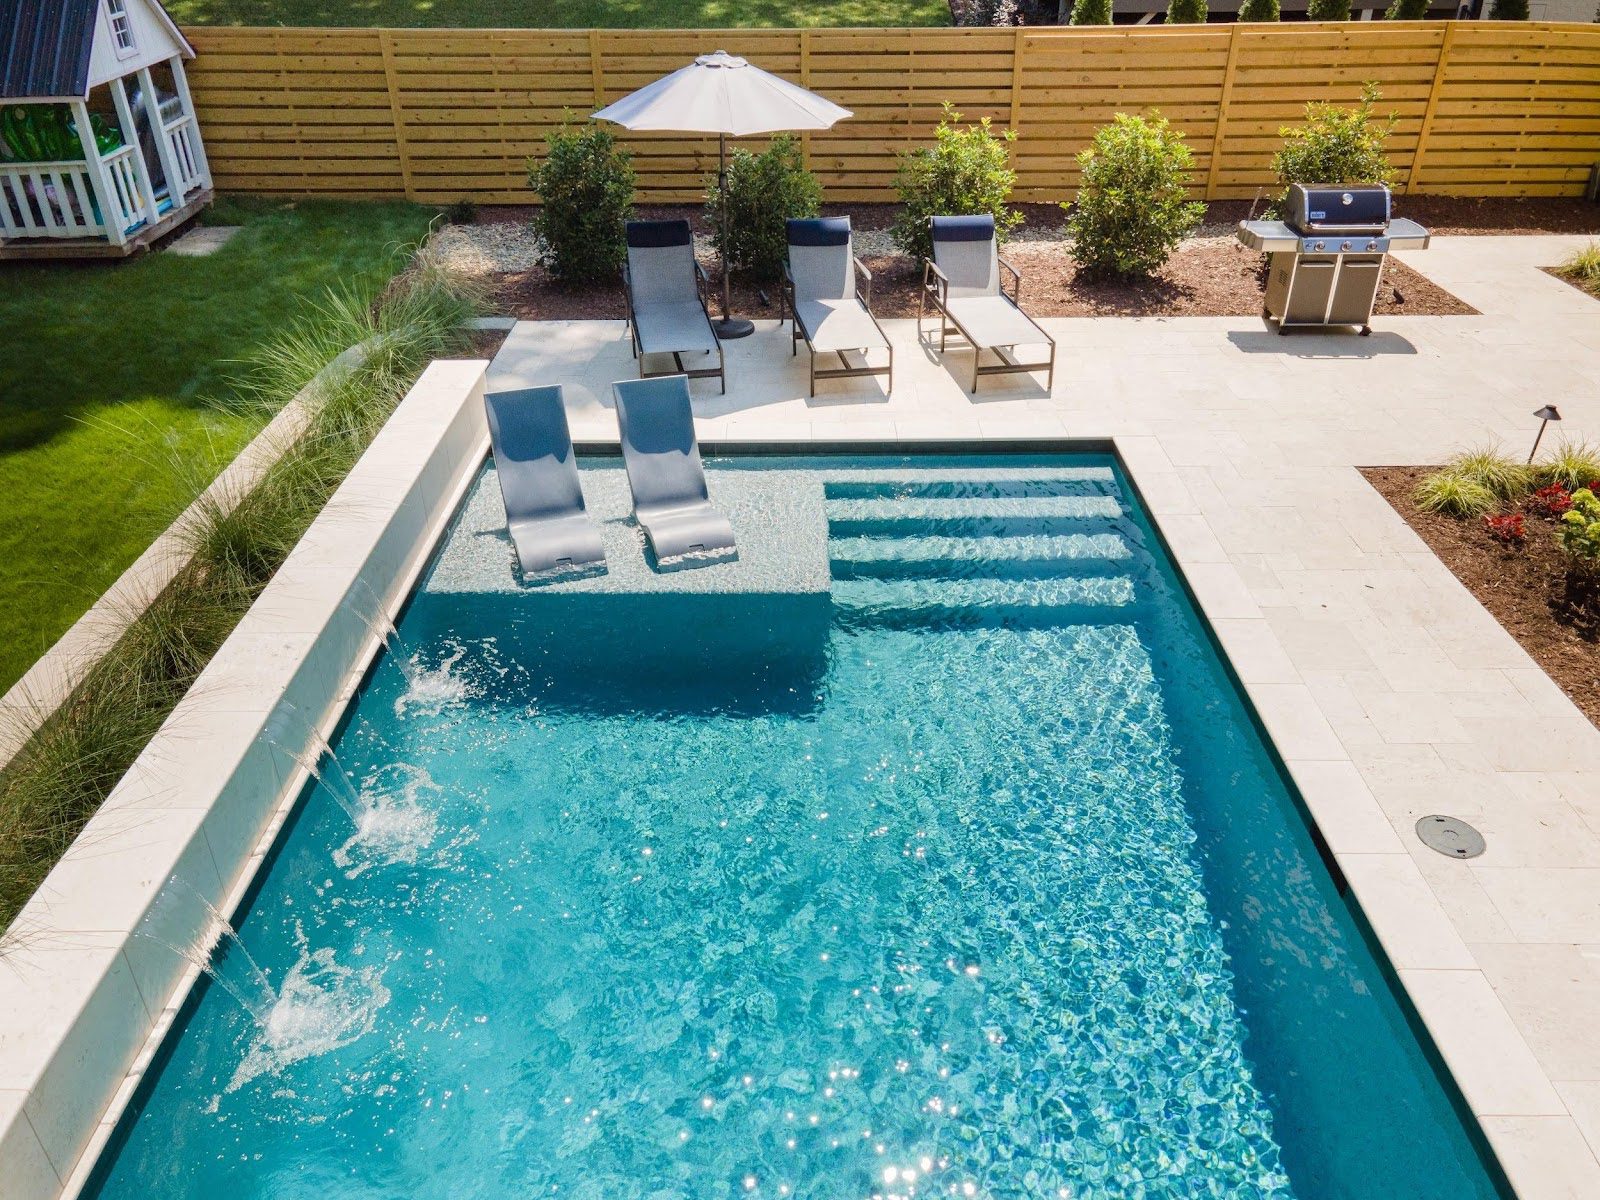 Take the Plunge: Why you should invest in a Custom In-Ground Pool